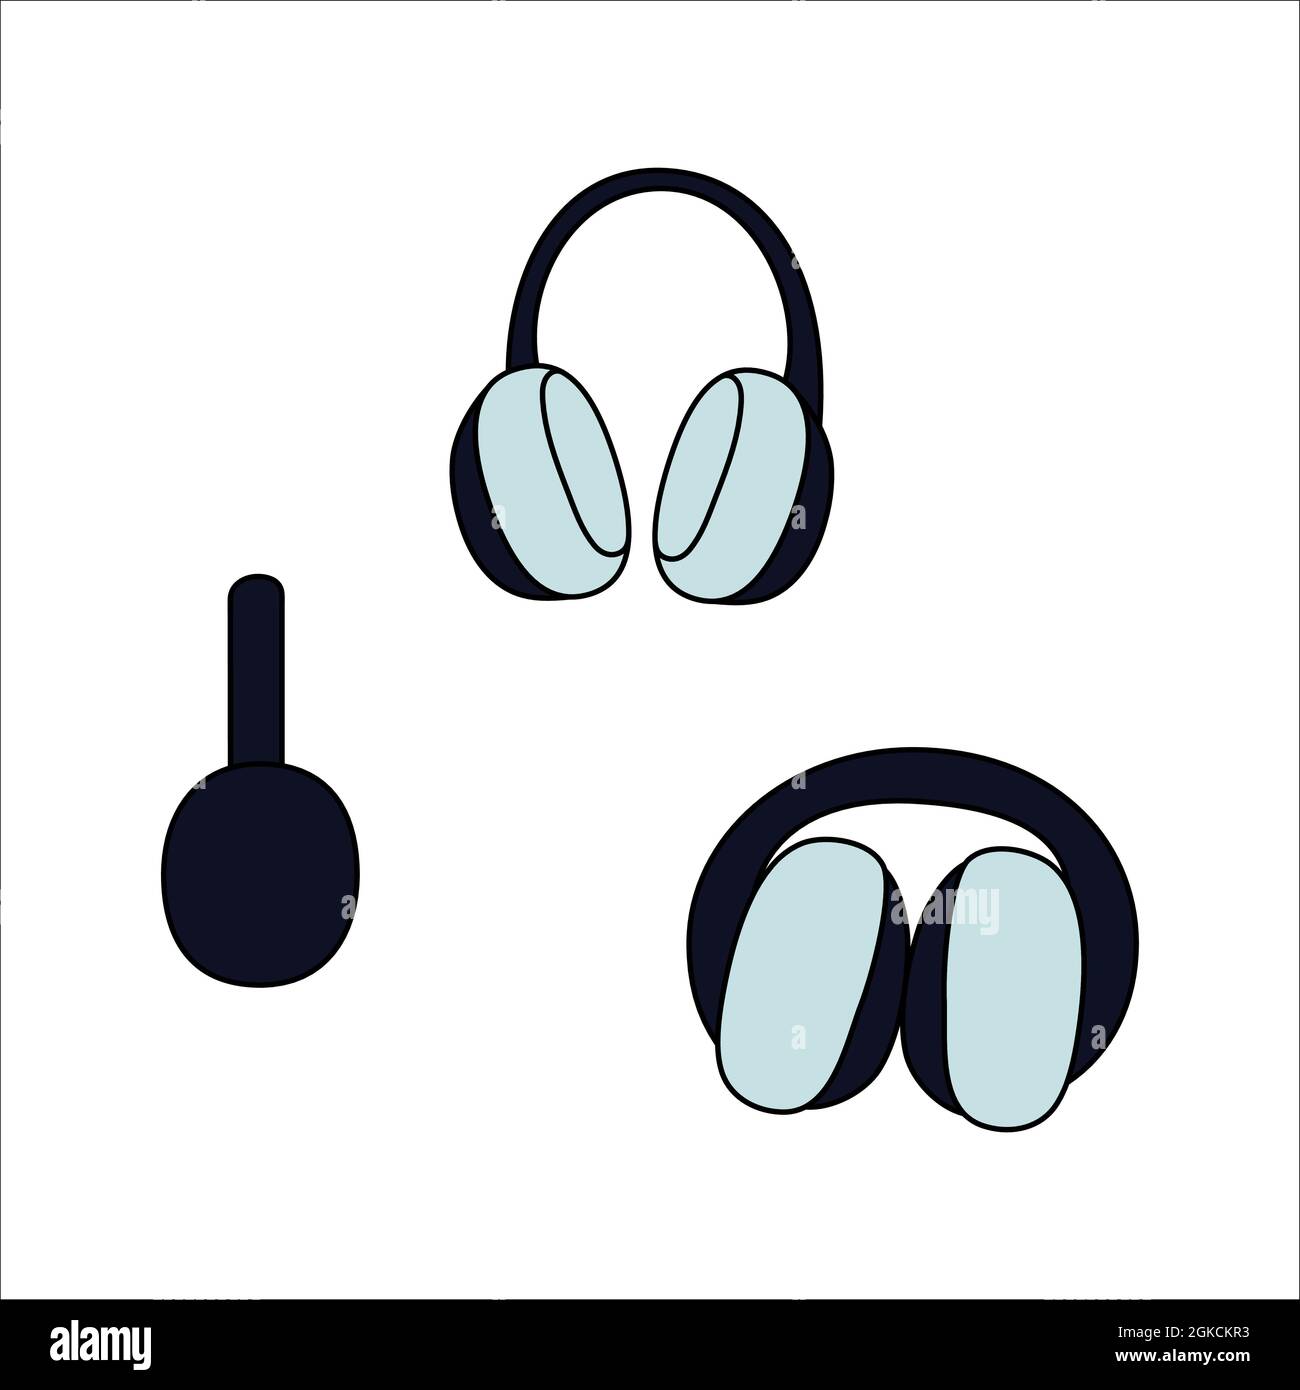 Doodle winter headphones, earmuff design. Winter vector colorful illustration isolated on white background. Stock Vector